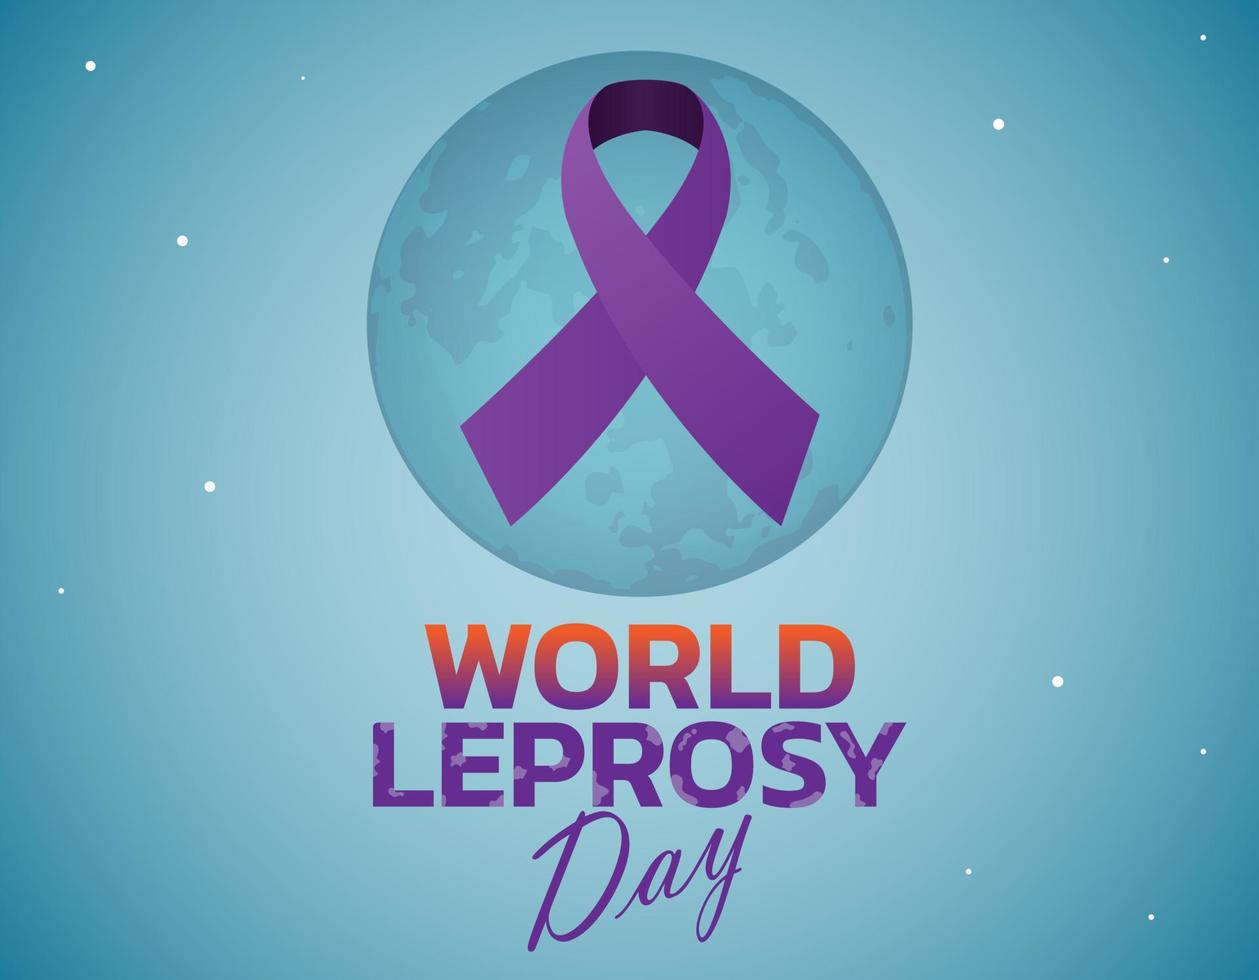 Vector illustration on the theme of World Leprosy Day